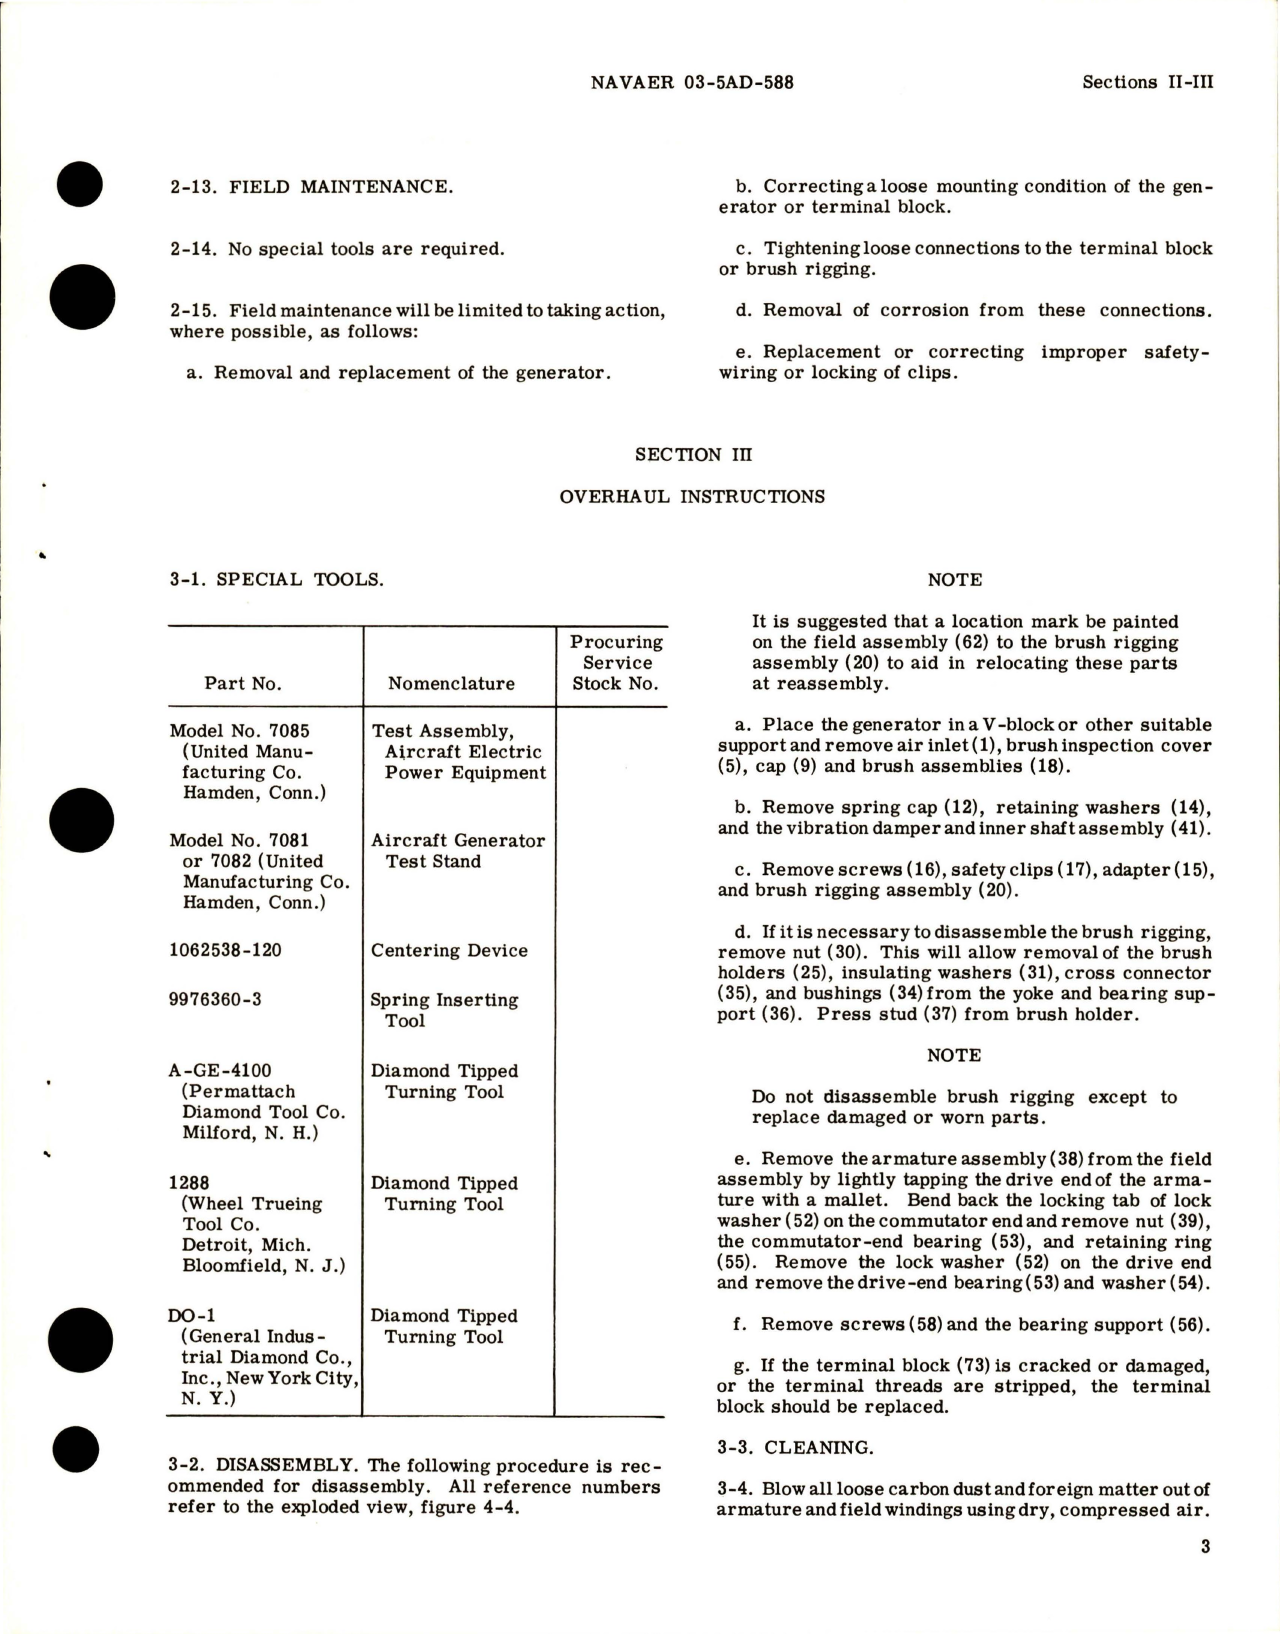 Sample page 7 from AirCorps Library document: Service and Overhaul Instructions for DC Generator 